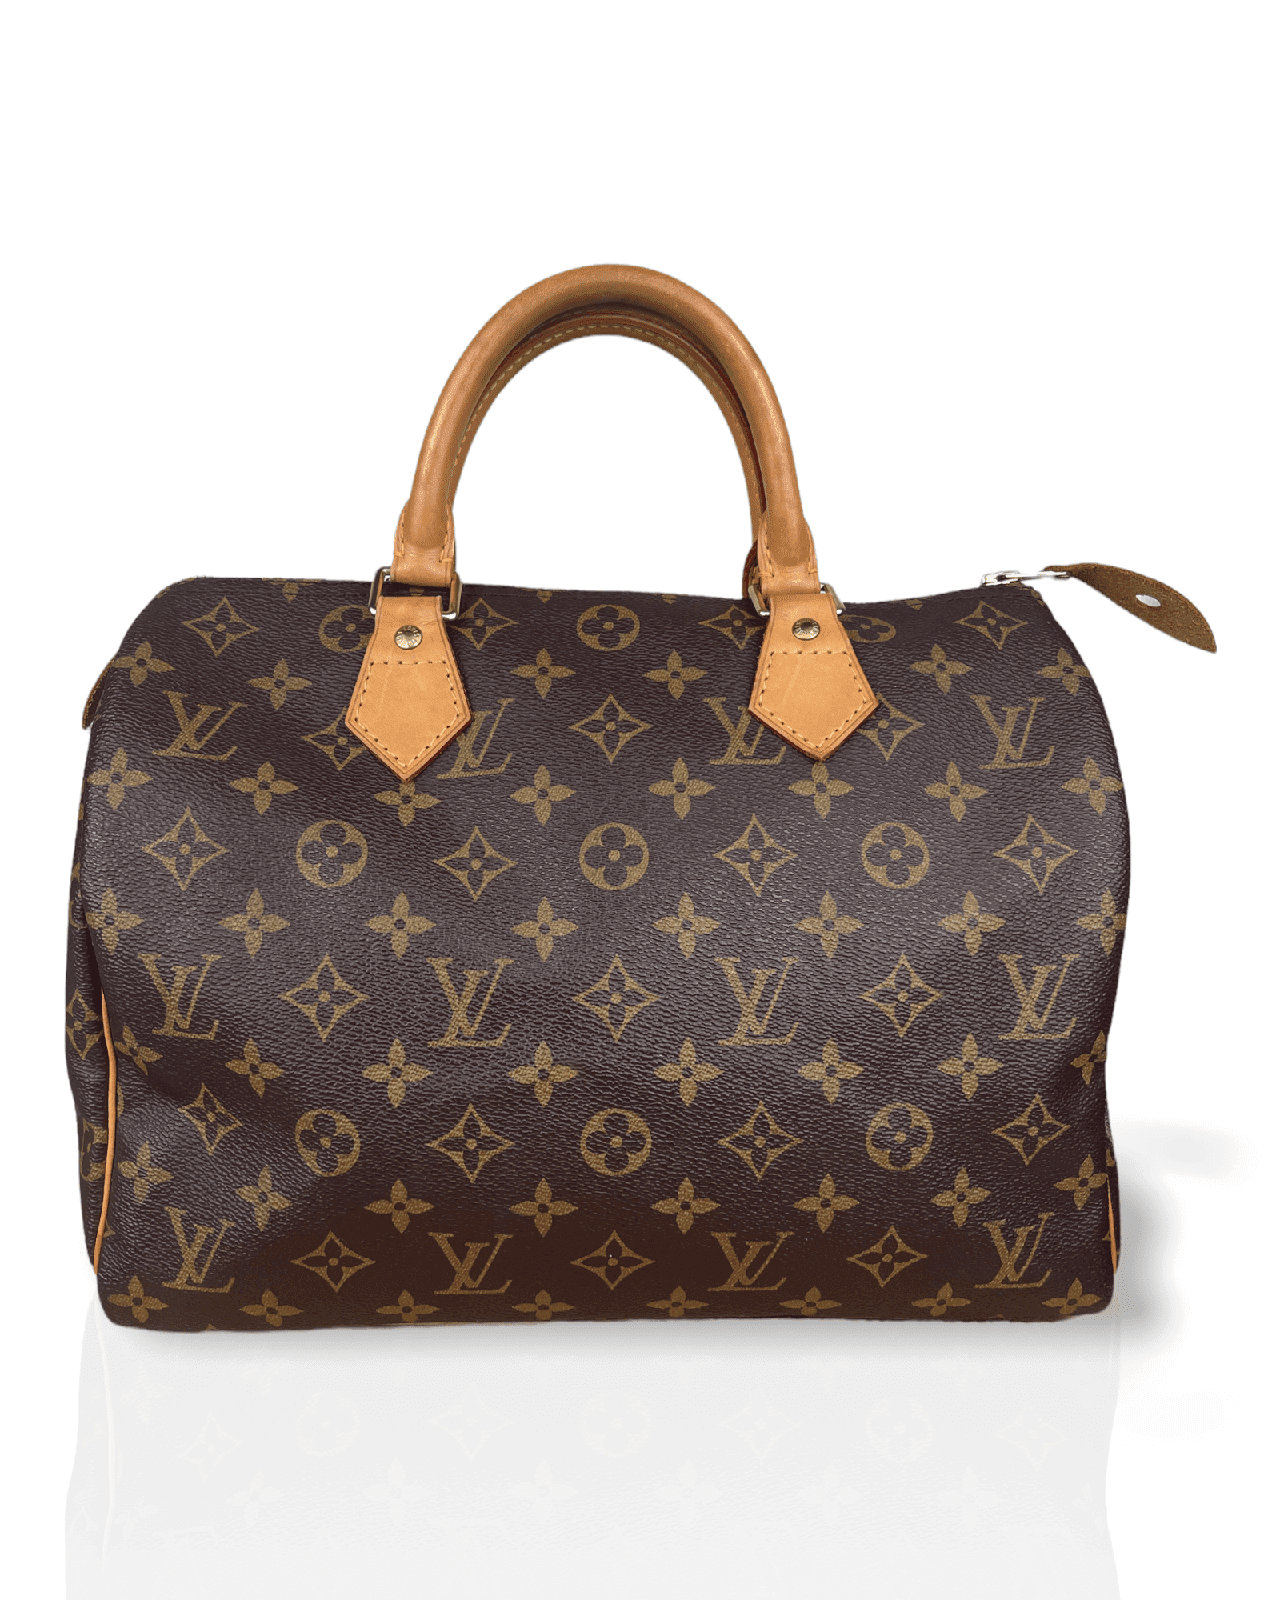 Buy Free Shipping [Used] LOUIS VUITTON Portefeuille Multiple